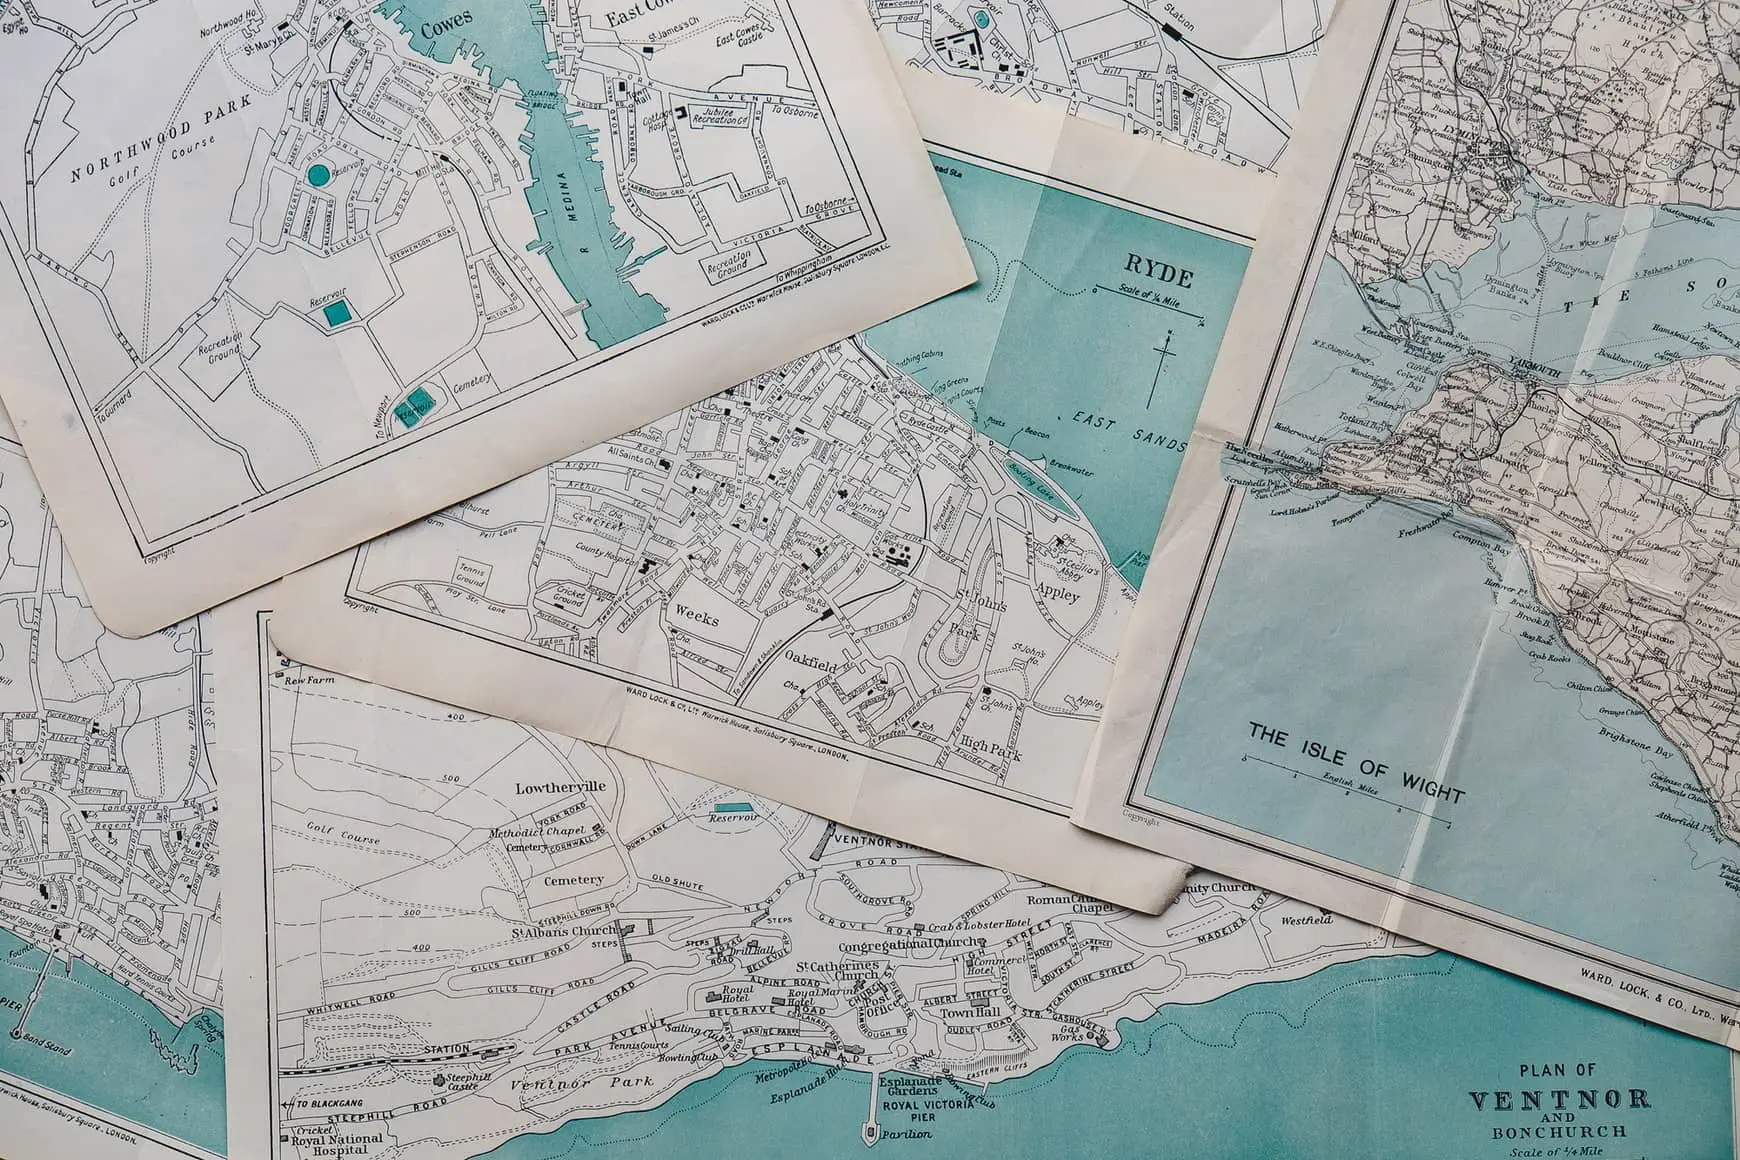 maps of the Isle of wight laid out on table